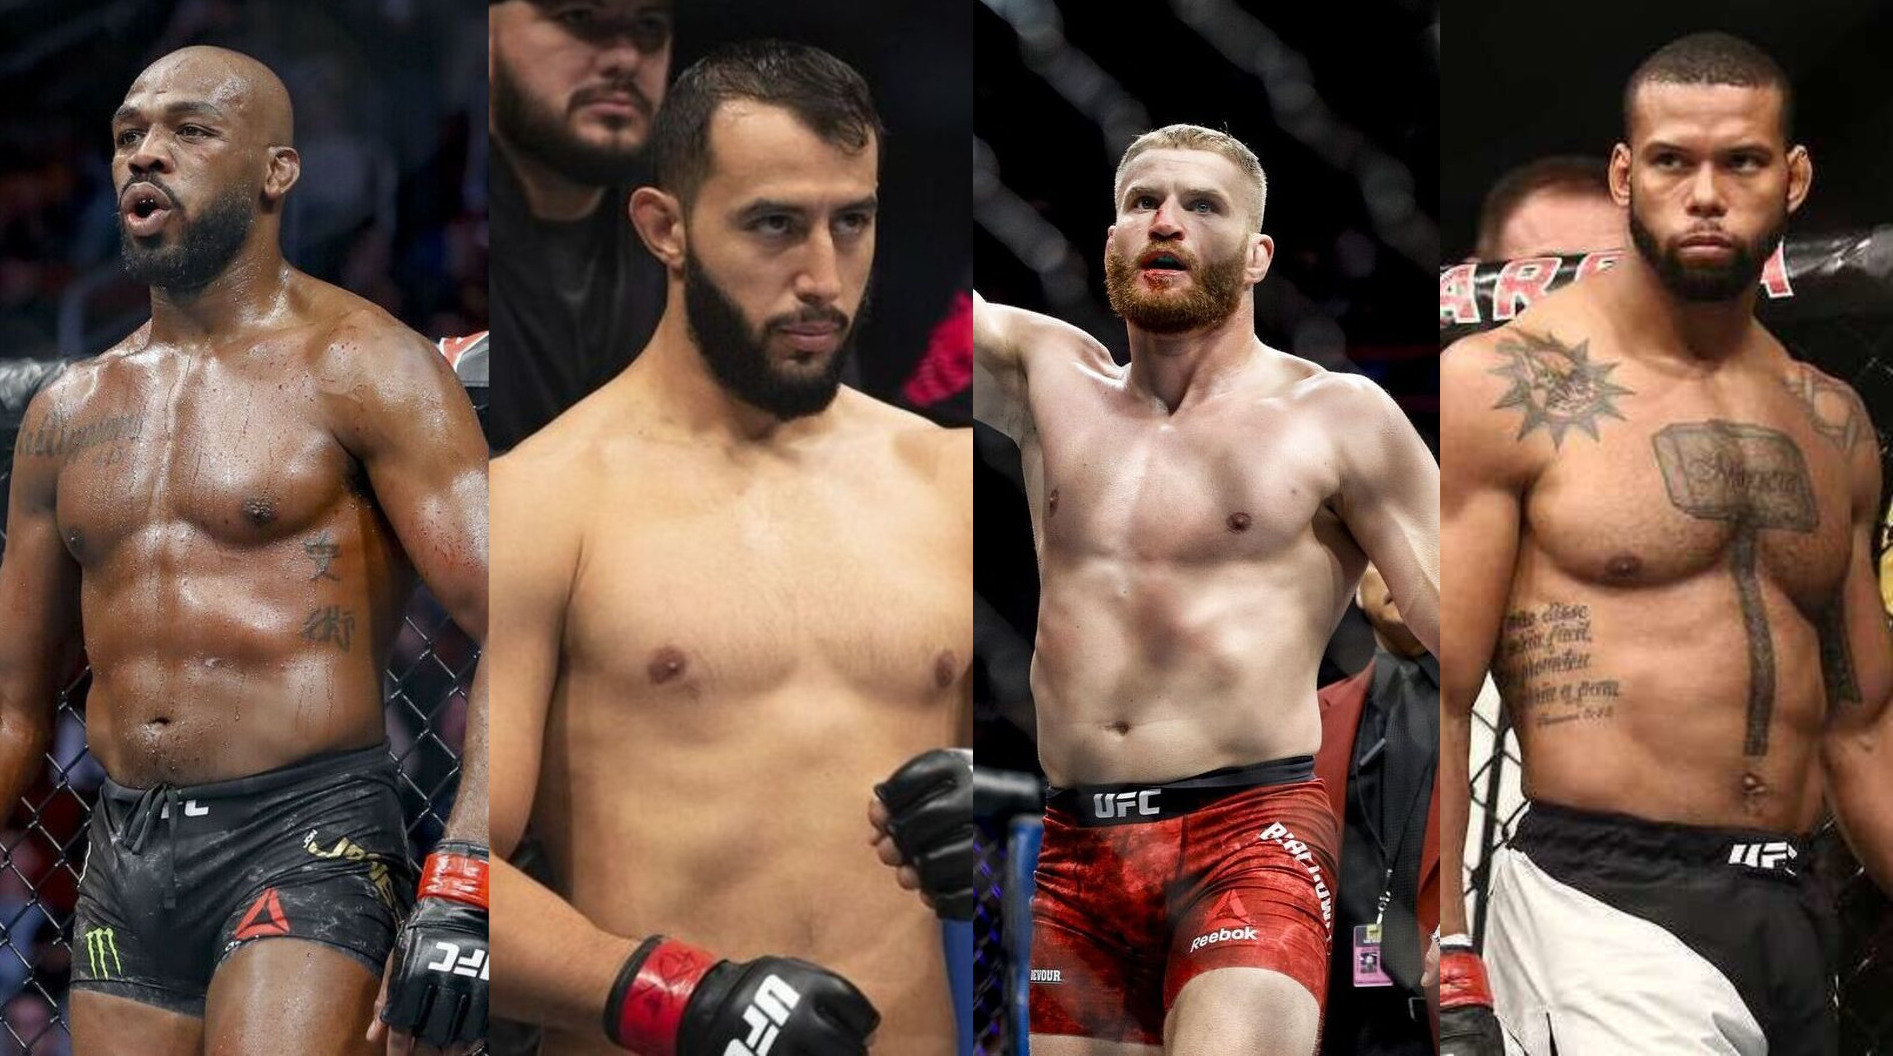 What's next in the UFC title picture?